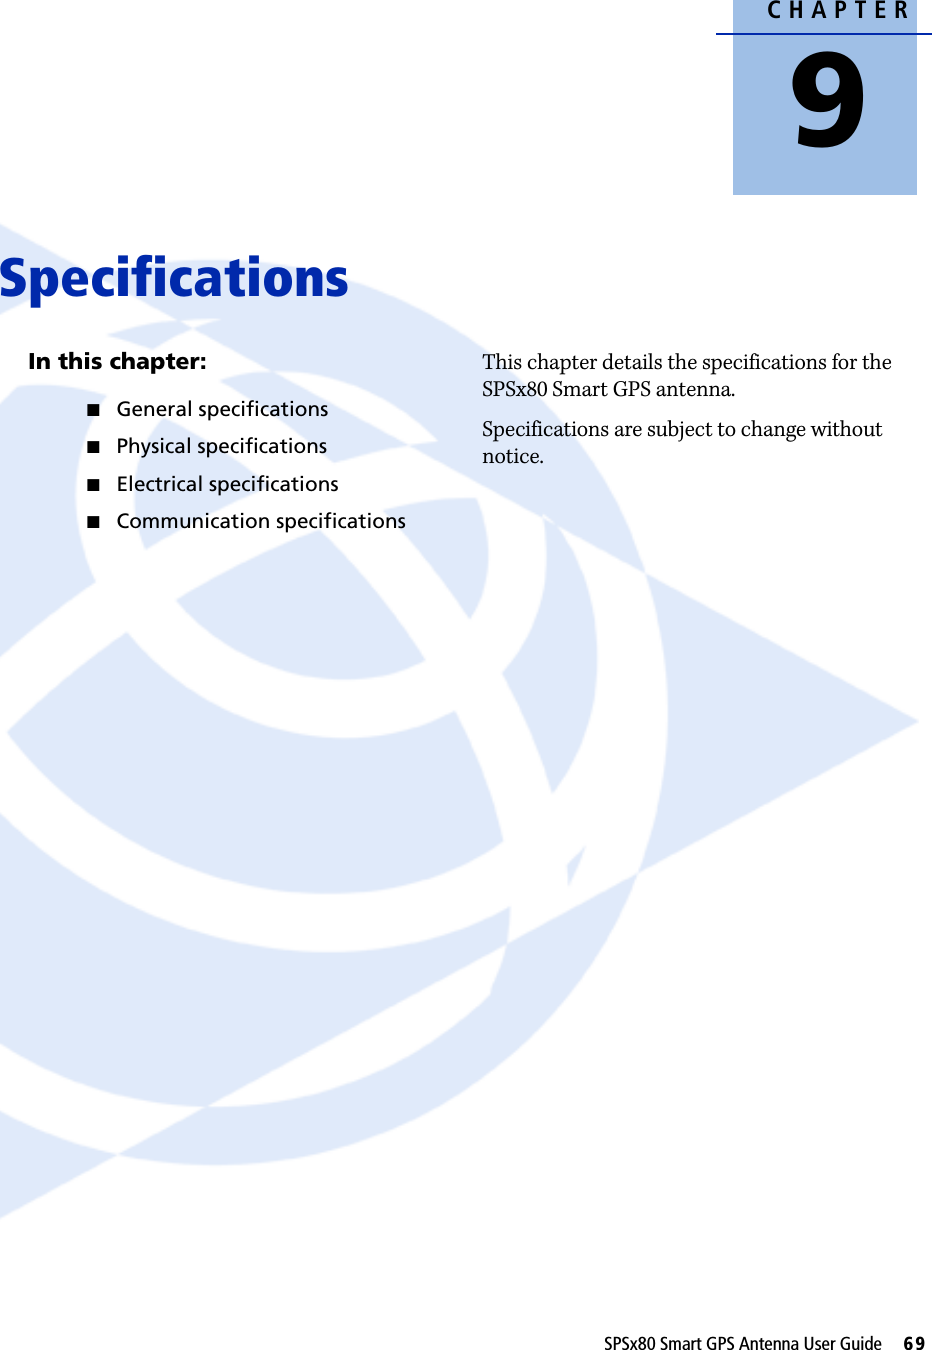 CHAPTER9SPSx80 Smart GPS Antenna User Guide     69Specifications 9In this chapter:QGeneral specificationsQPhysical specificationsQElectrical specificationsQCommunication specificationsThis chapter details the specifications for the SPSx80 Smart GPS antenna.Specifications are subject to change without notice.